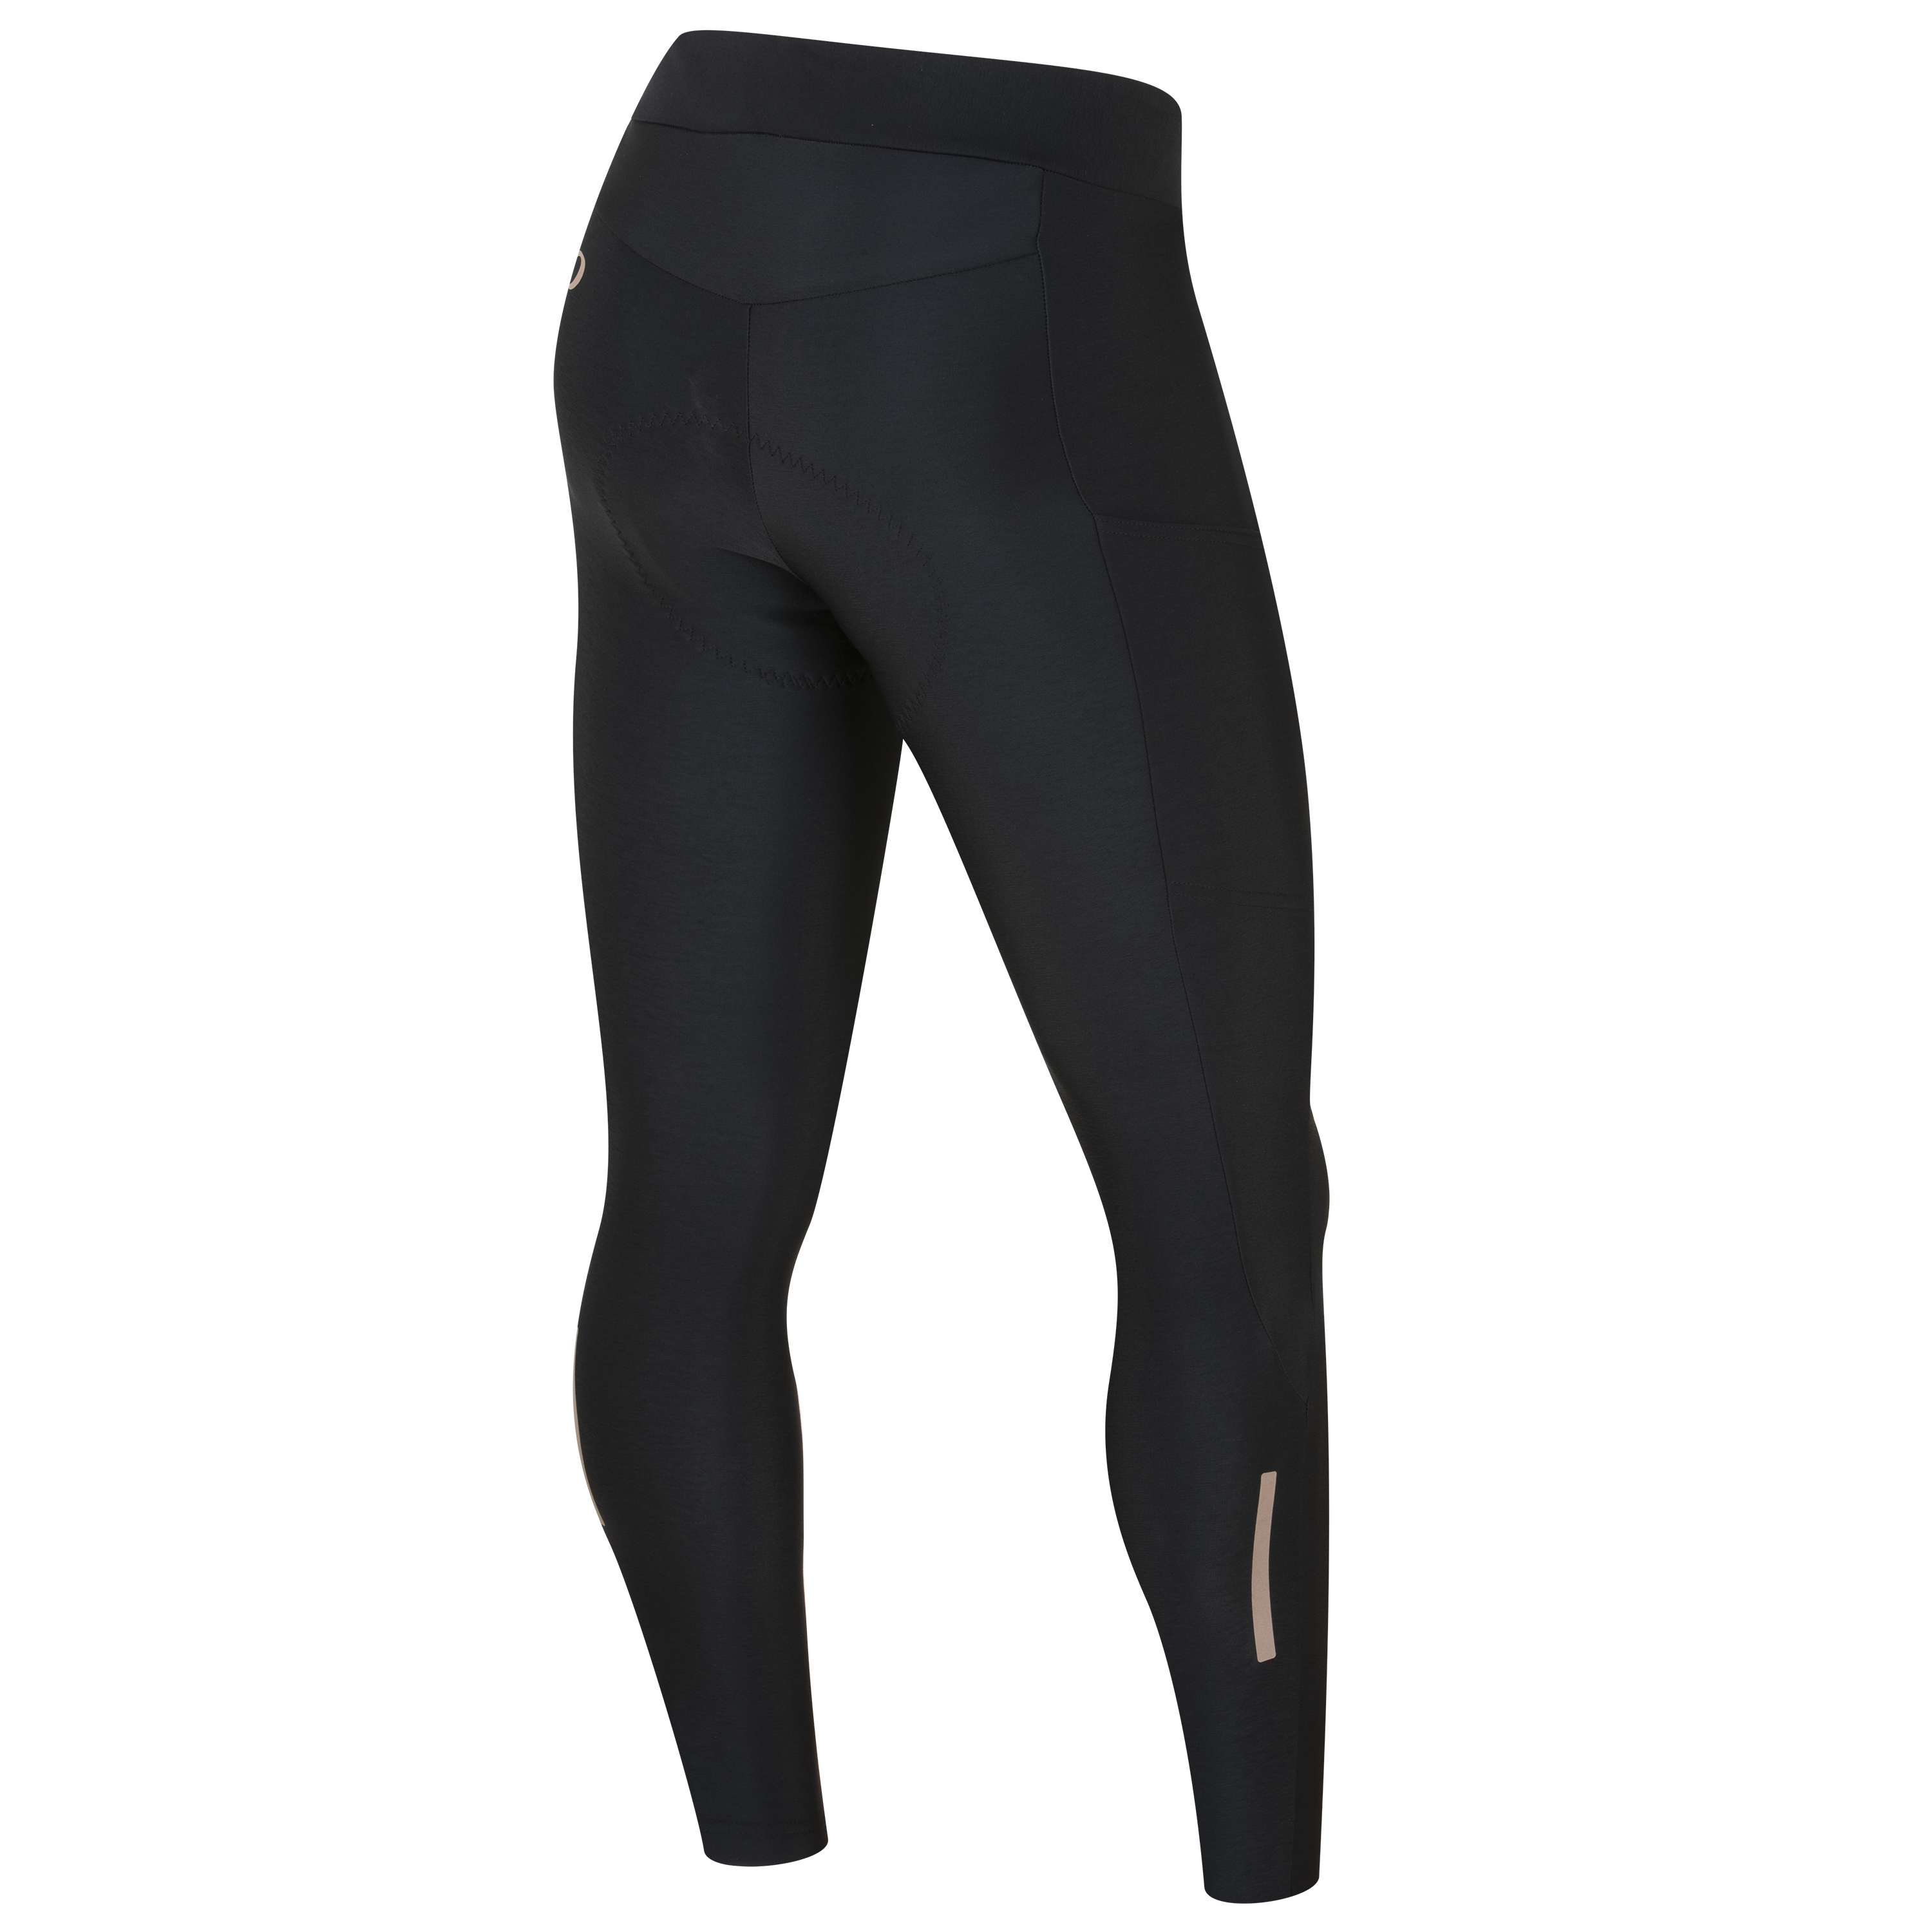 Women's Bike Pants 4D Padded Winter Cycling Pants Thermal Fleece Lined Long  Bicycle Tights Leggings with Pockets